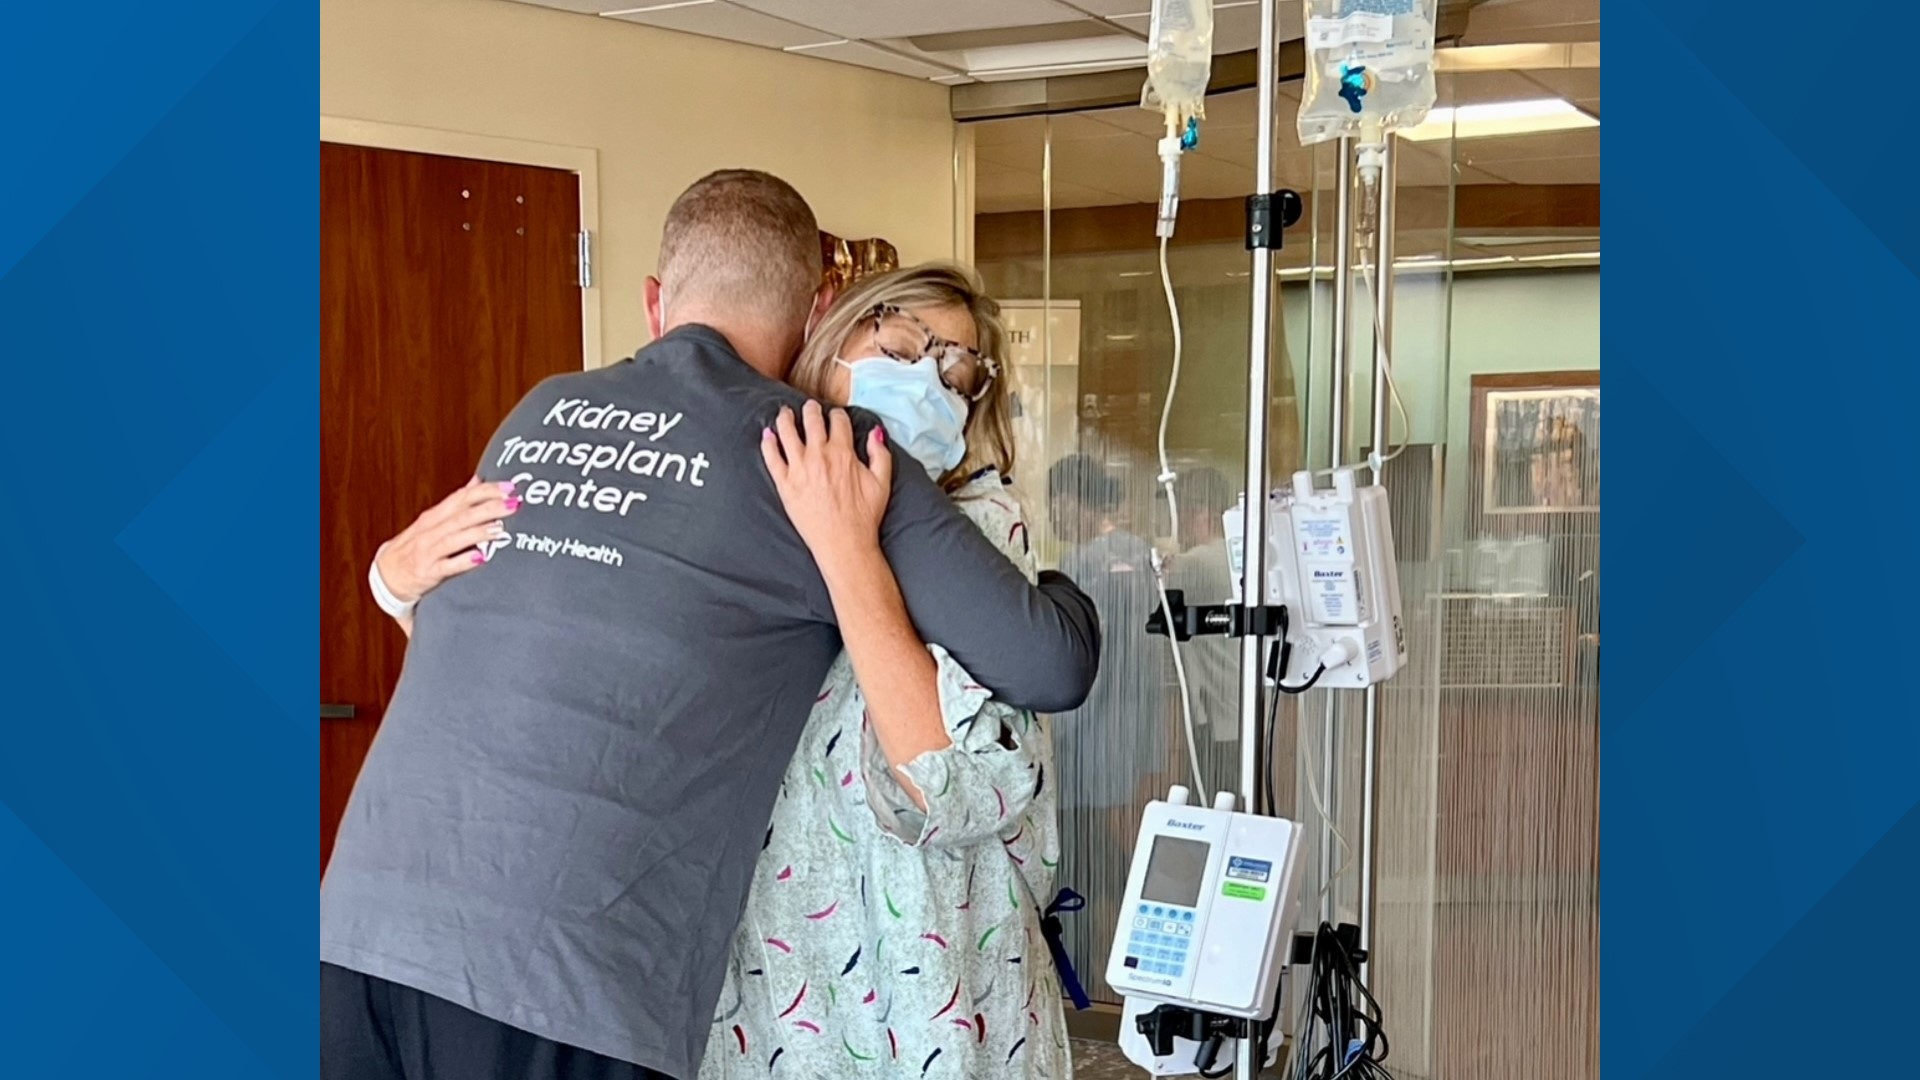 Amy McKay was told she had just months to live without a live kidney donor. Desperate, she reached out to 13 ON YOUR SIDE. Thankfully, Scott Paniwozik was watching.